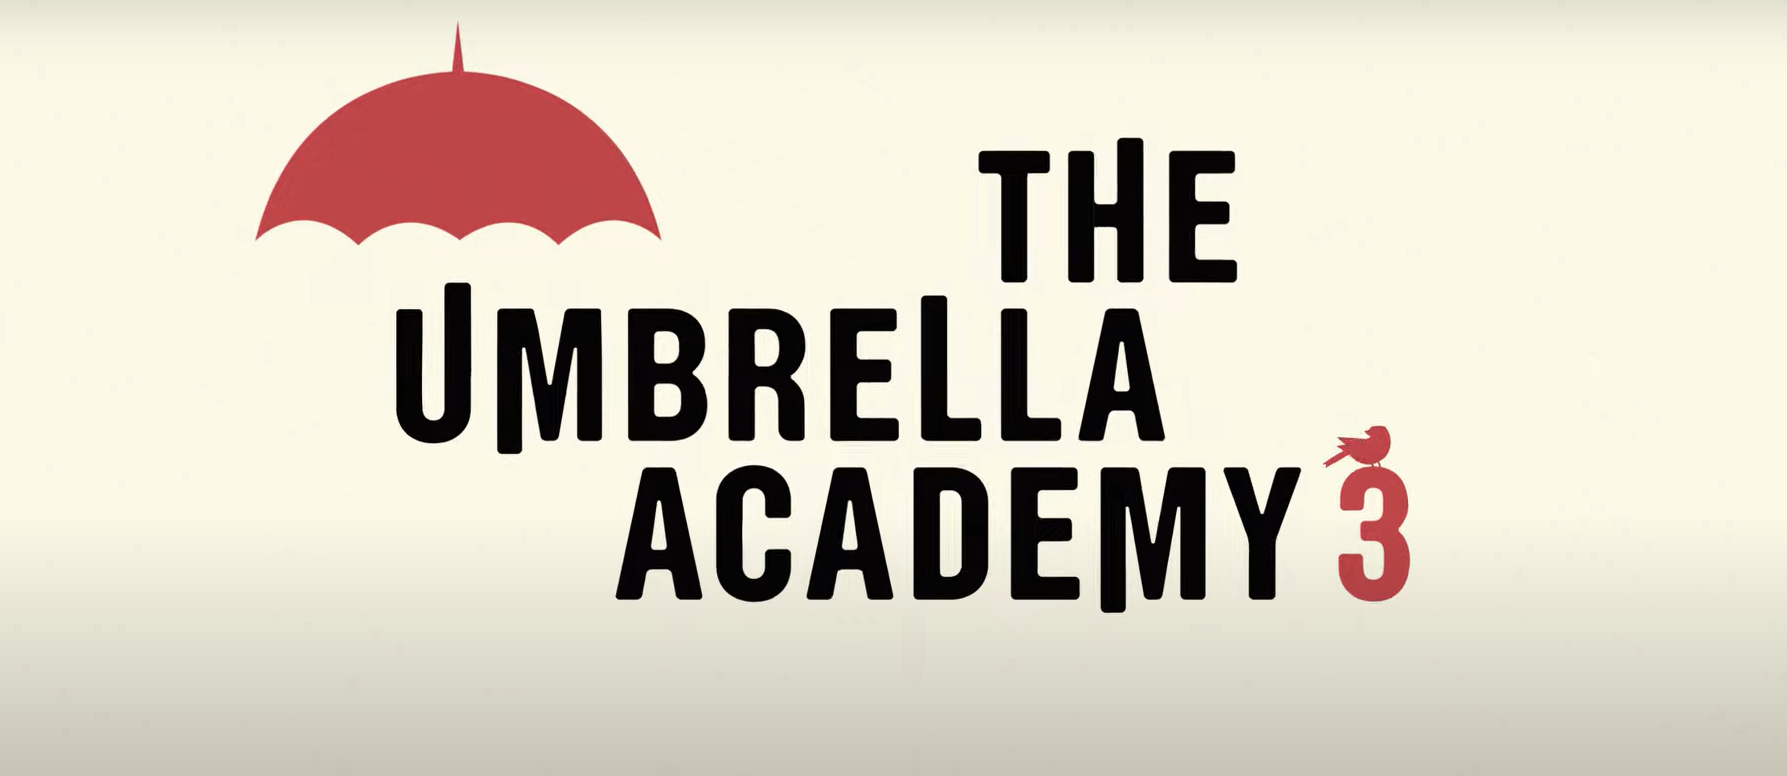 Image for Netflix just dropped The Umbrella Academy season 3 trailer, and it's kind of awesome